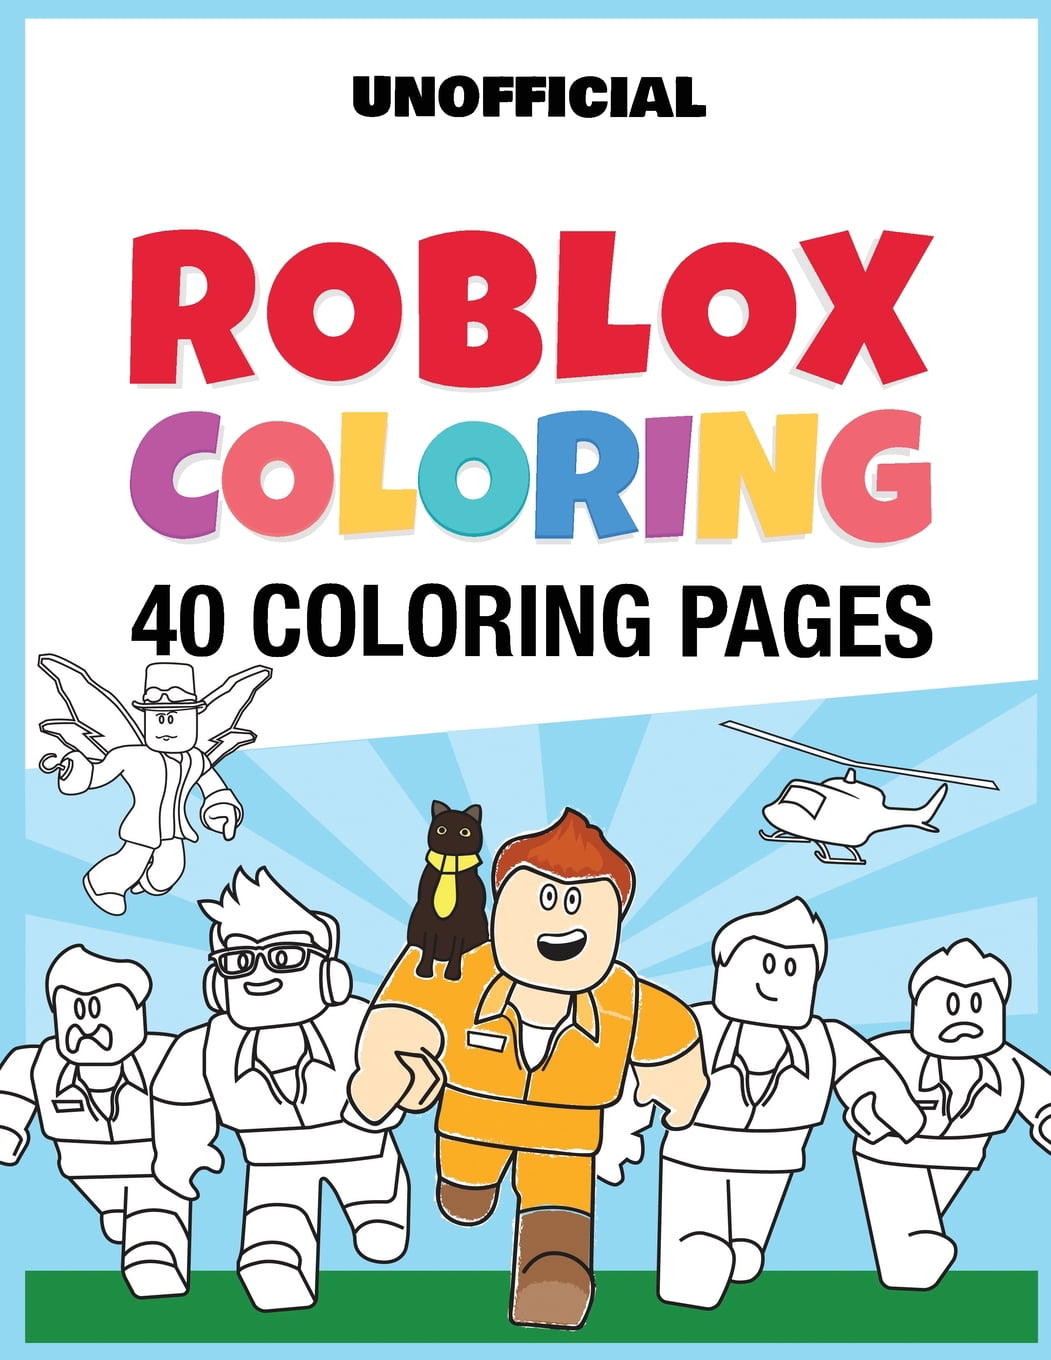 Roblox Coloring 40 Coloring Pages Paperback Walmart Com - seans cafe v2 roblox